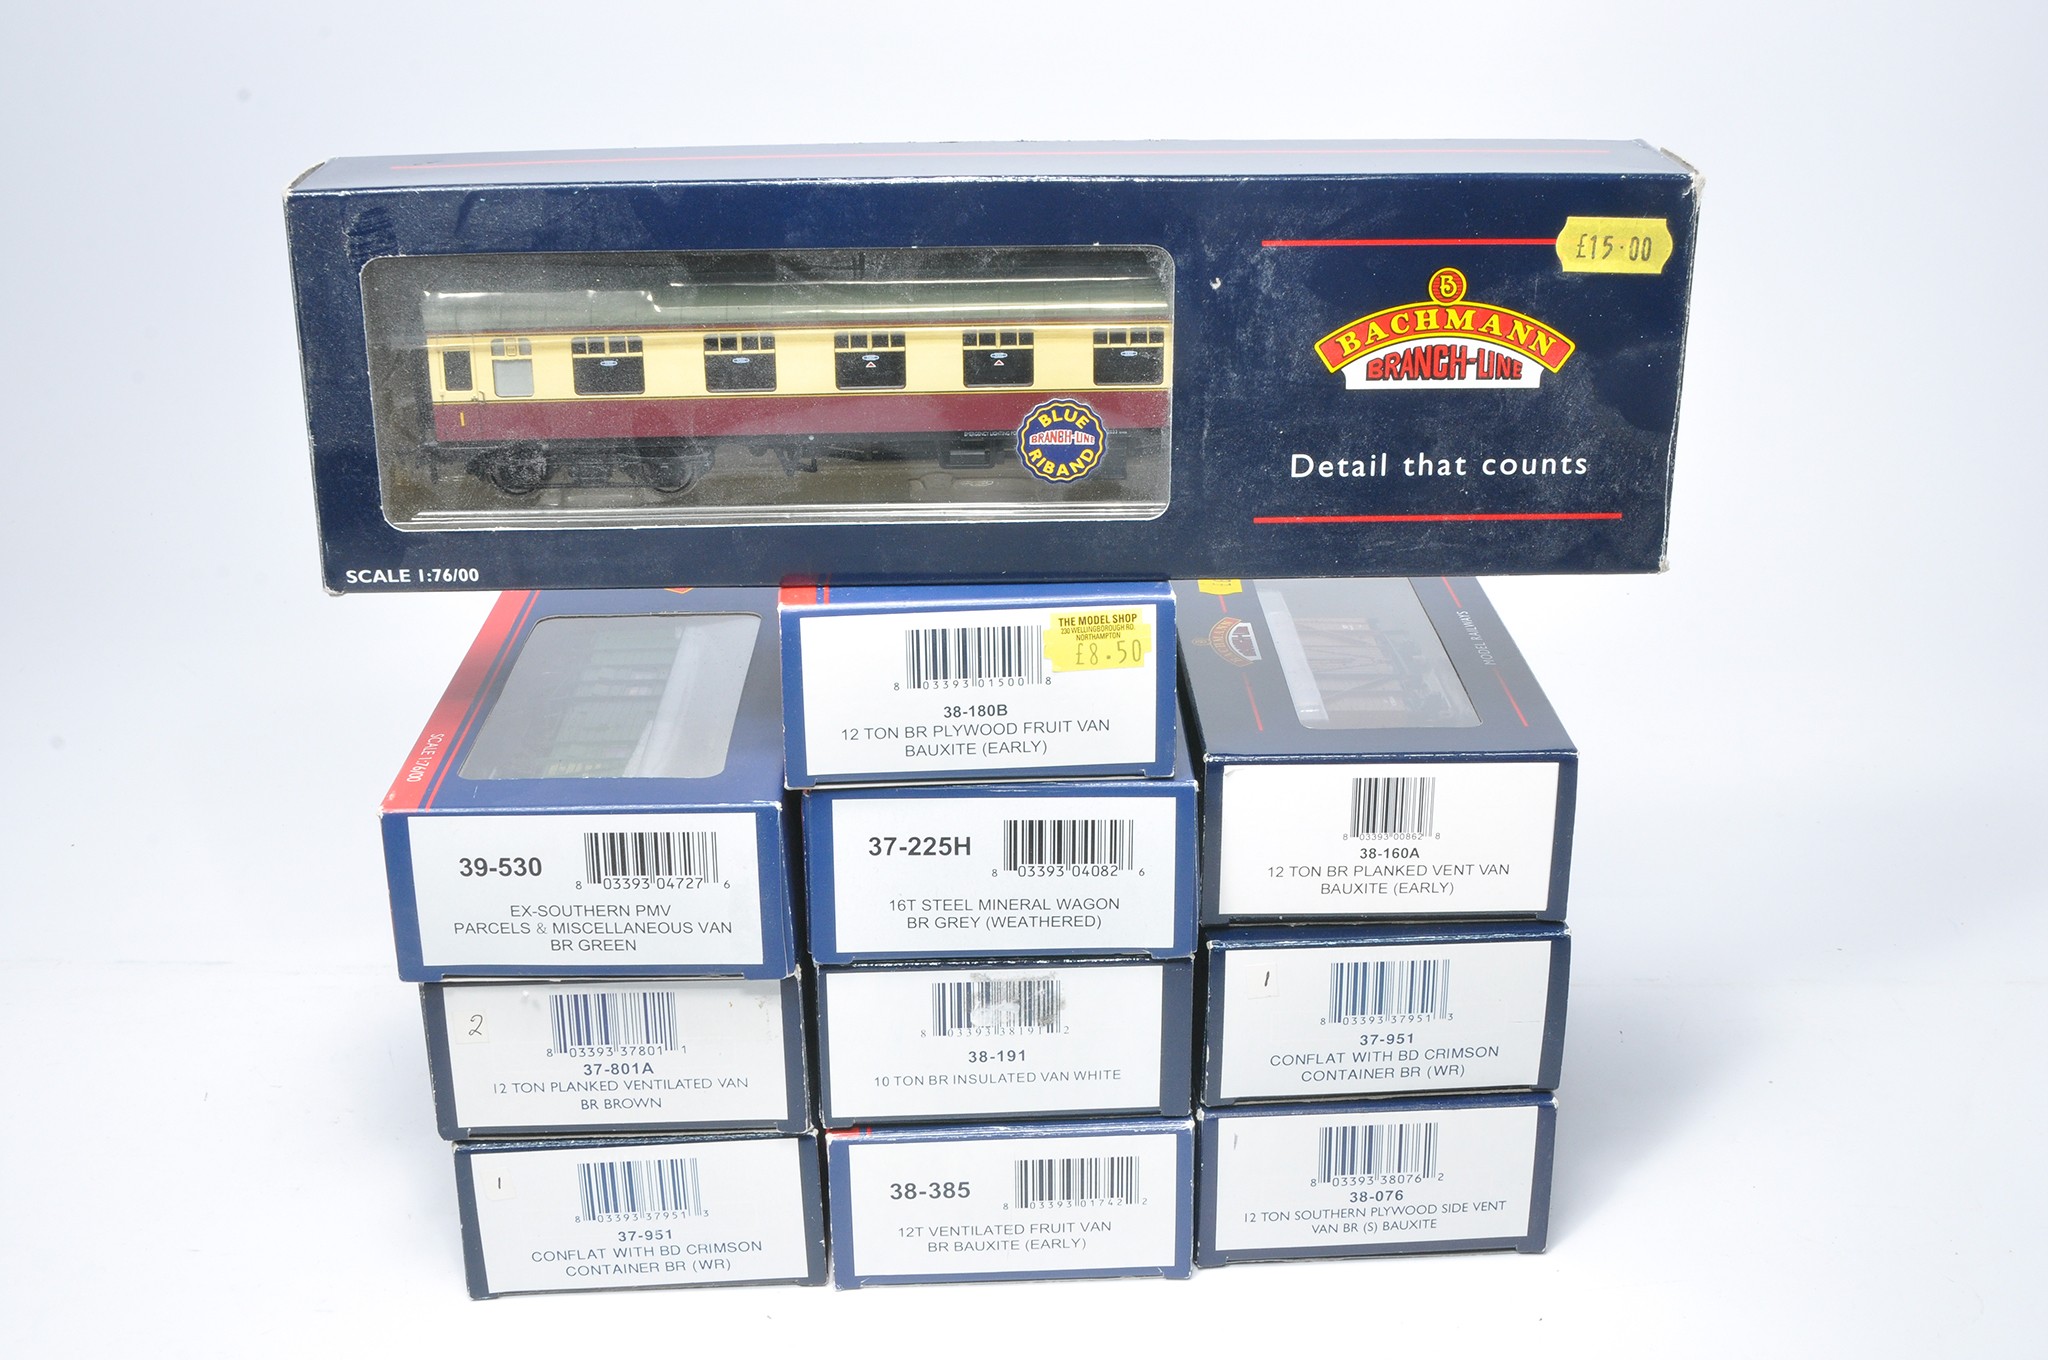 An assortment of Bachman Model Railway Rolling Stock issues as shown in original boxes.